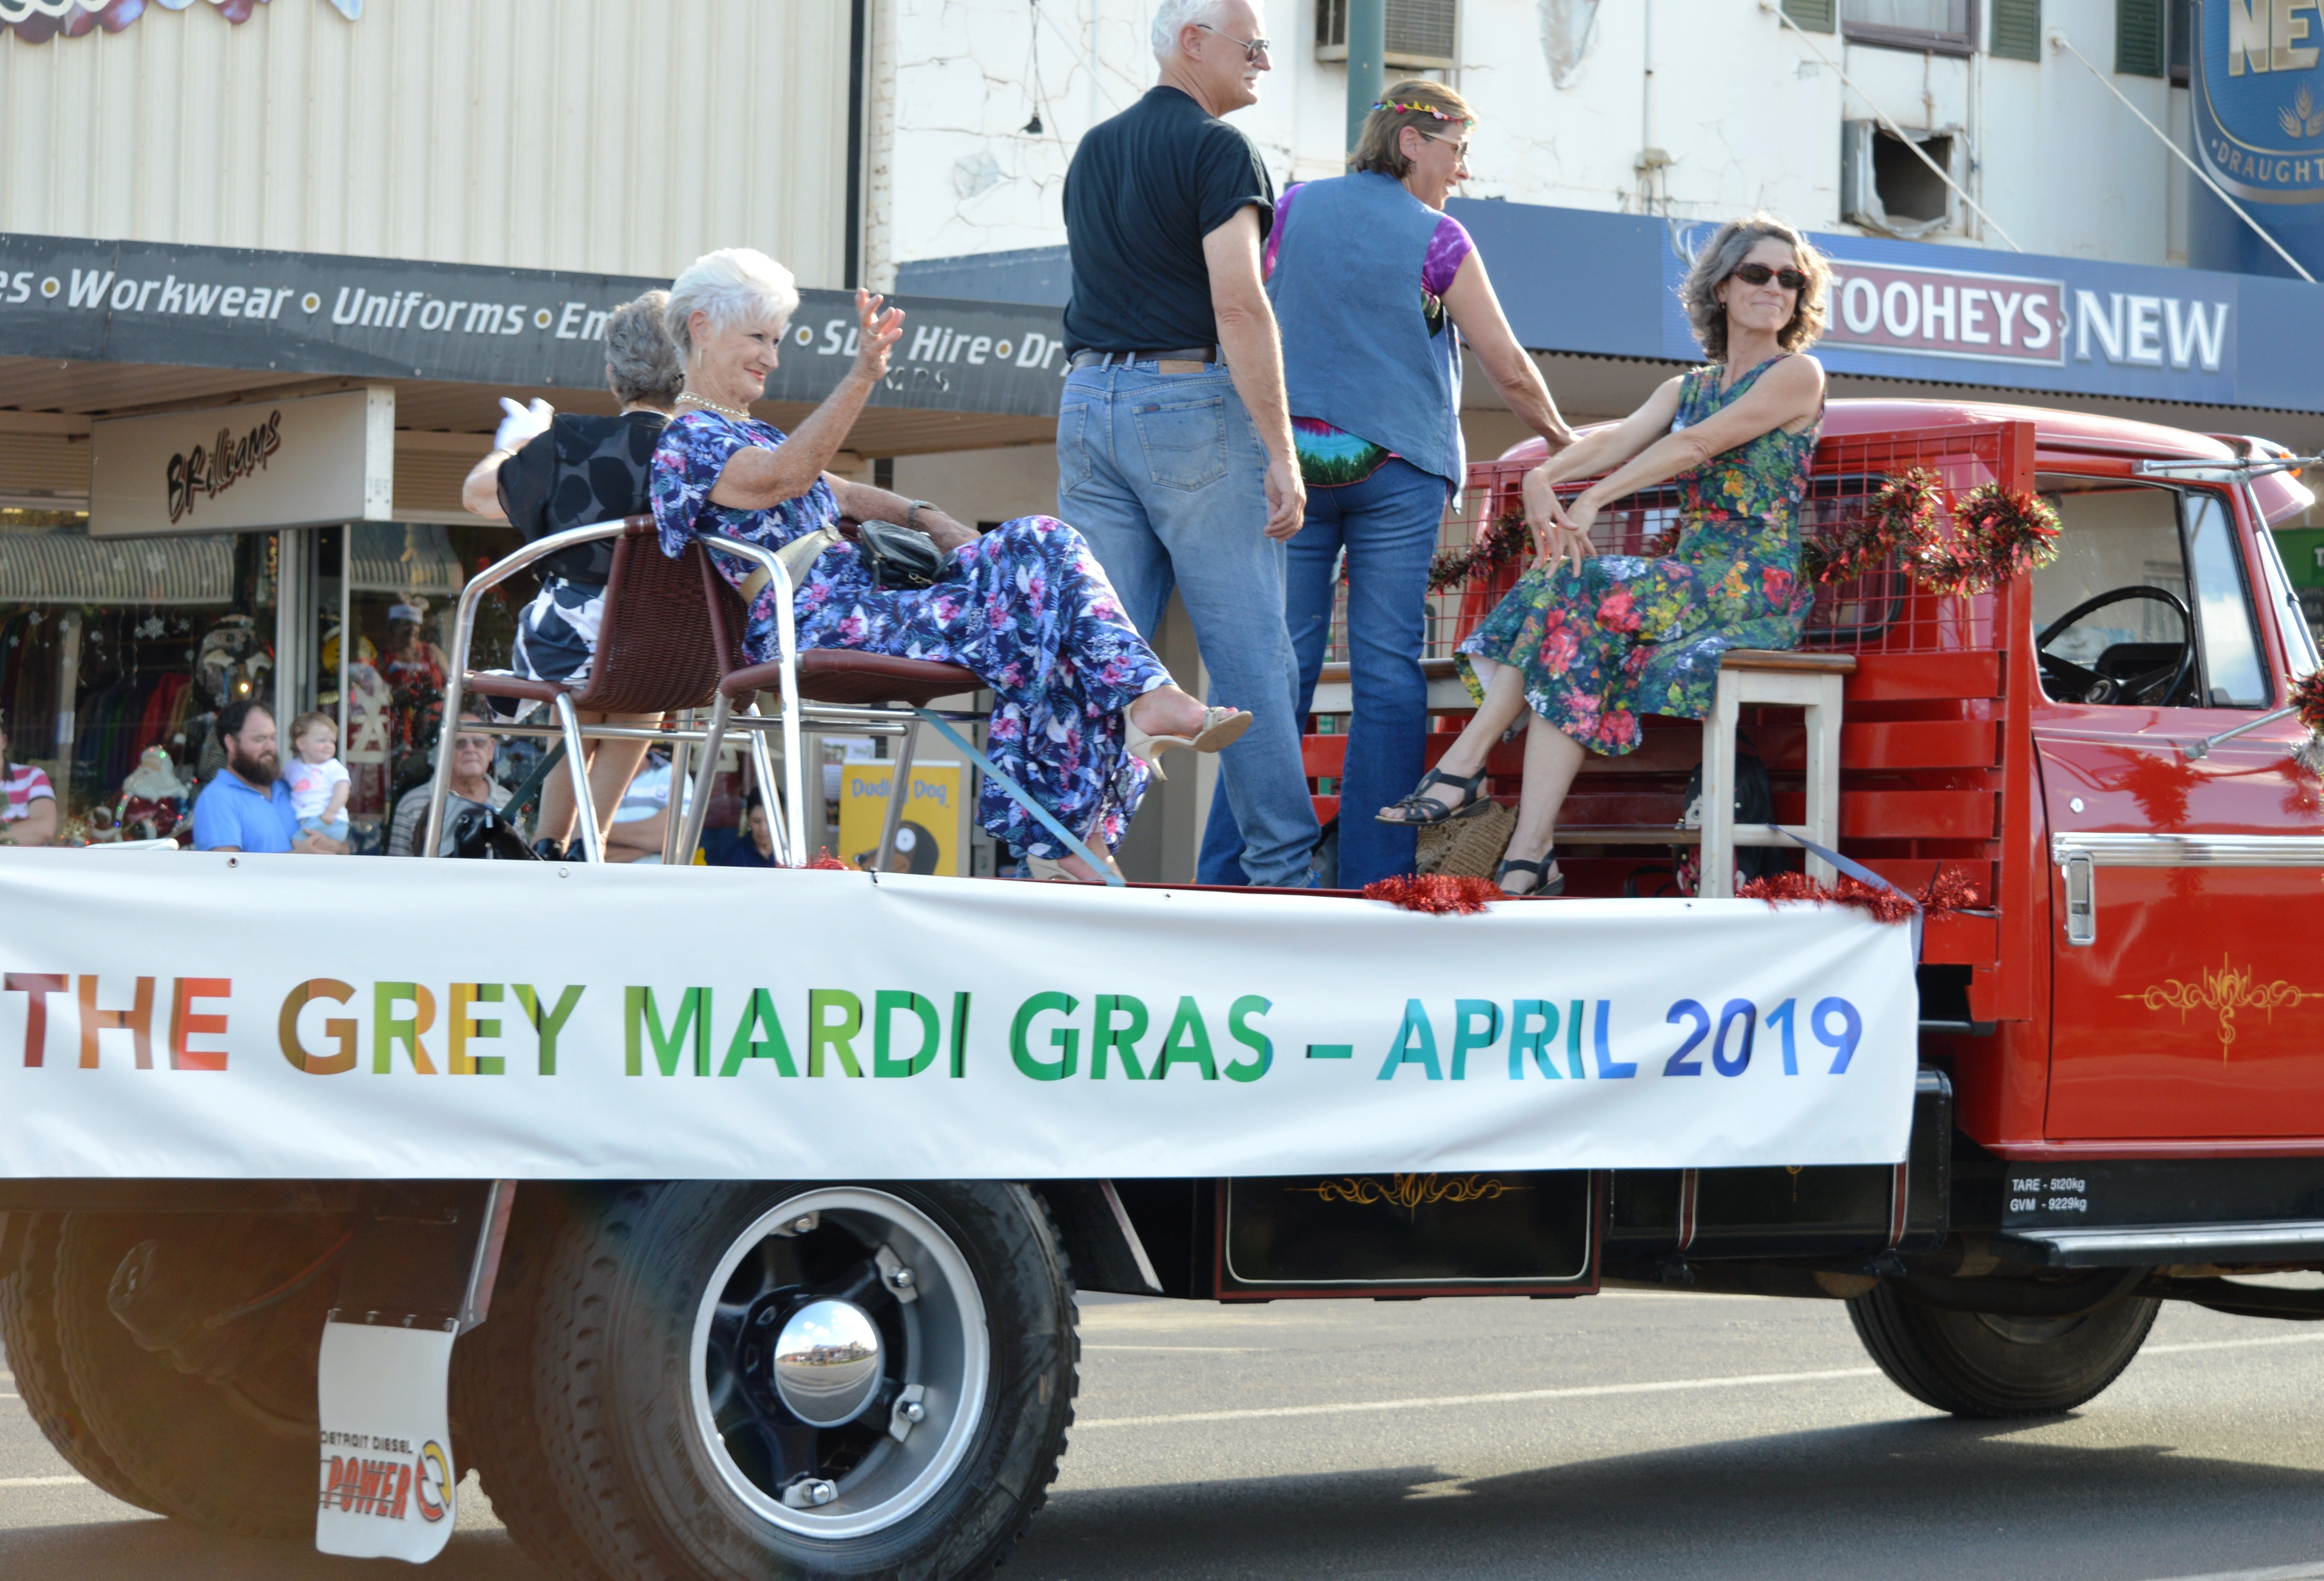 The Grey Mardi Gras - Pubs and Clubs